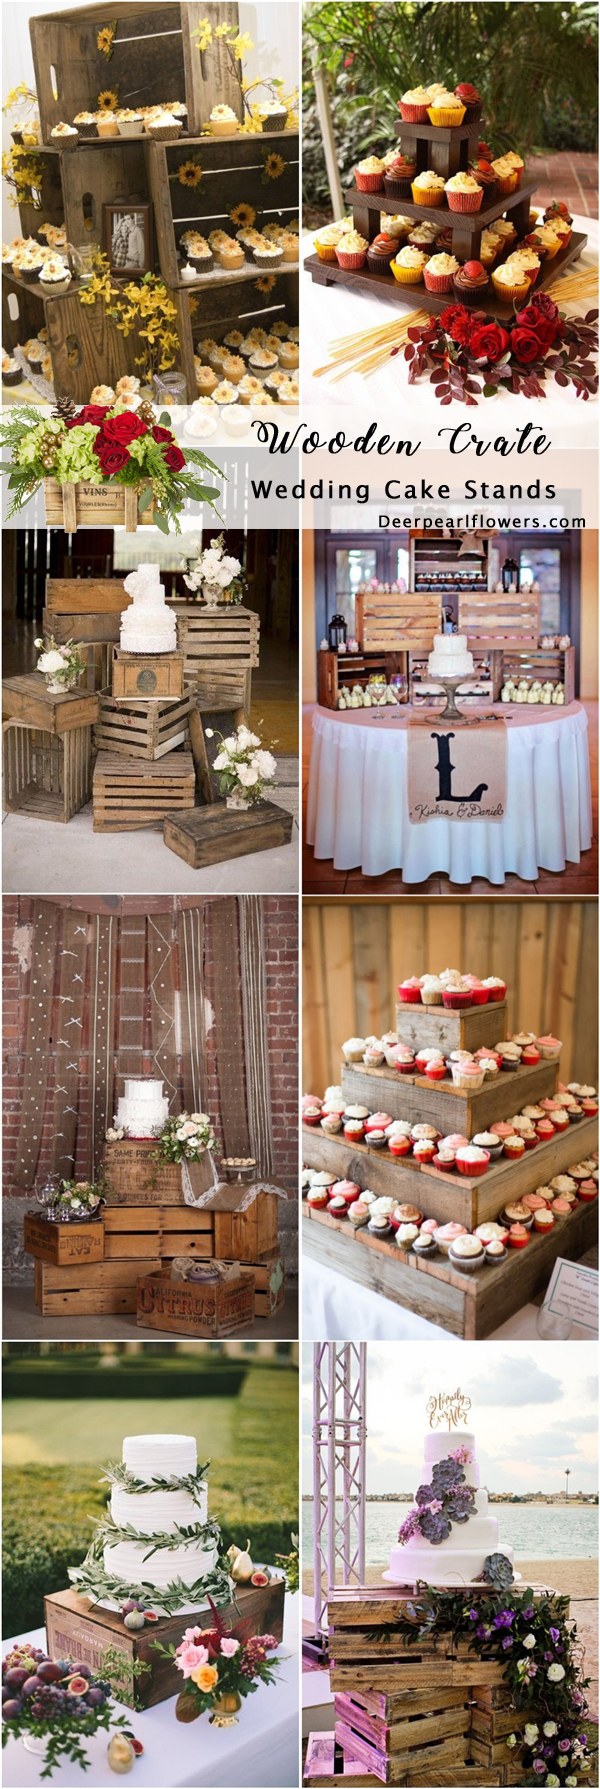 Wooden crate wedding cake stand decor